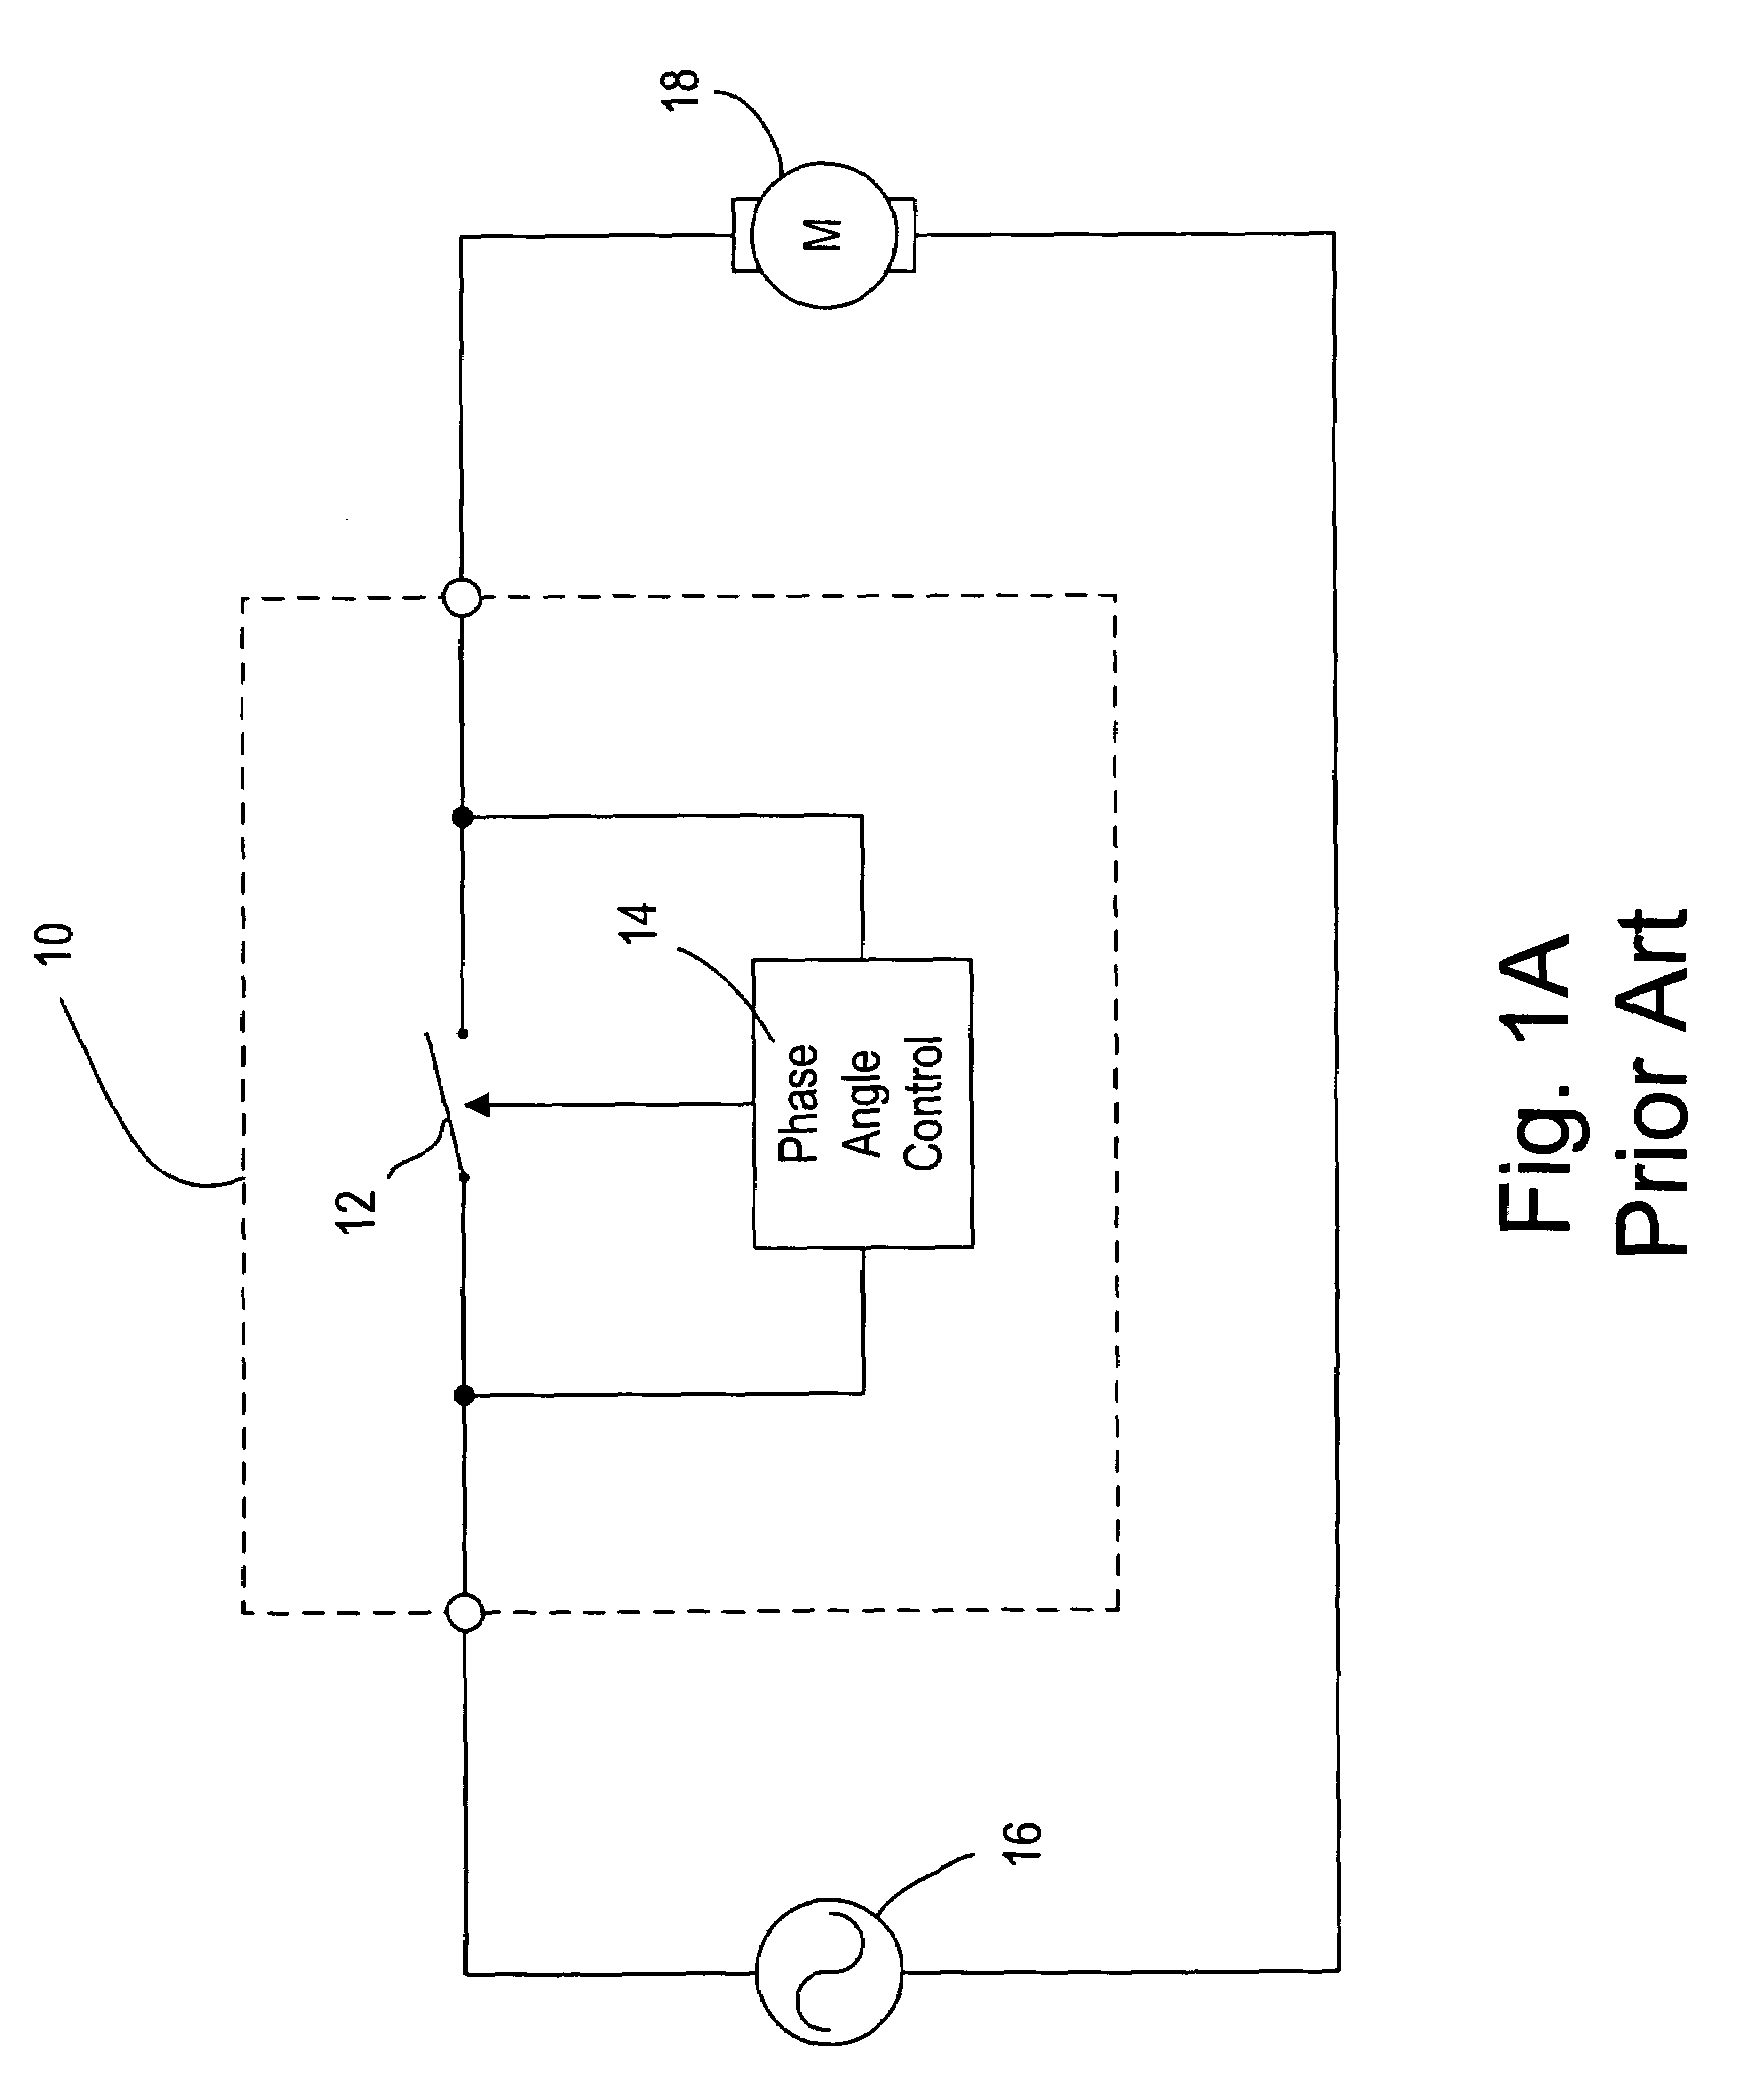 Method and apparatus for quiet variable motor speed control